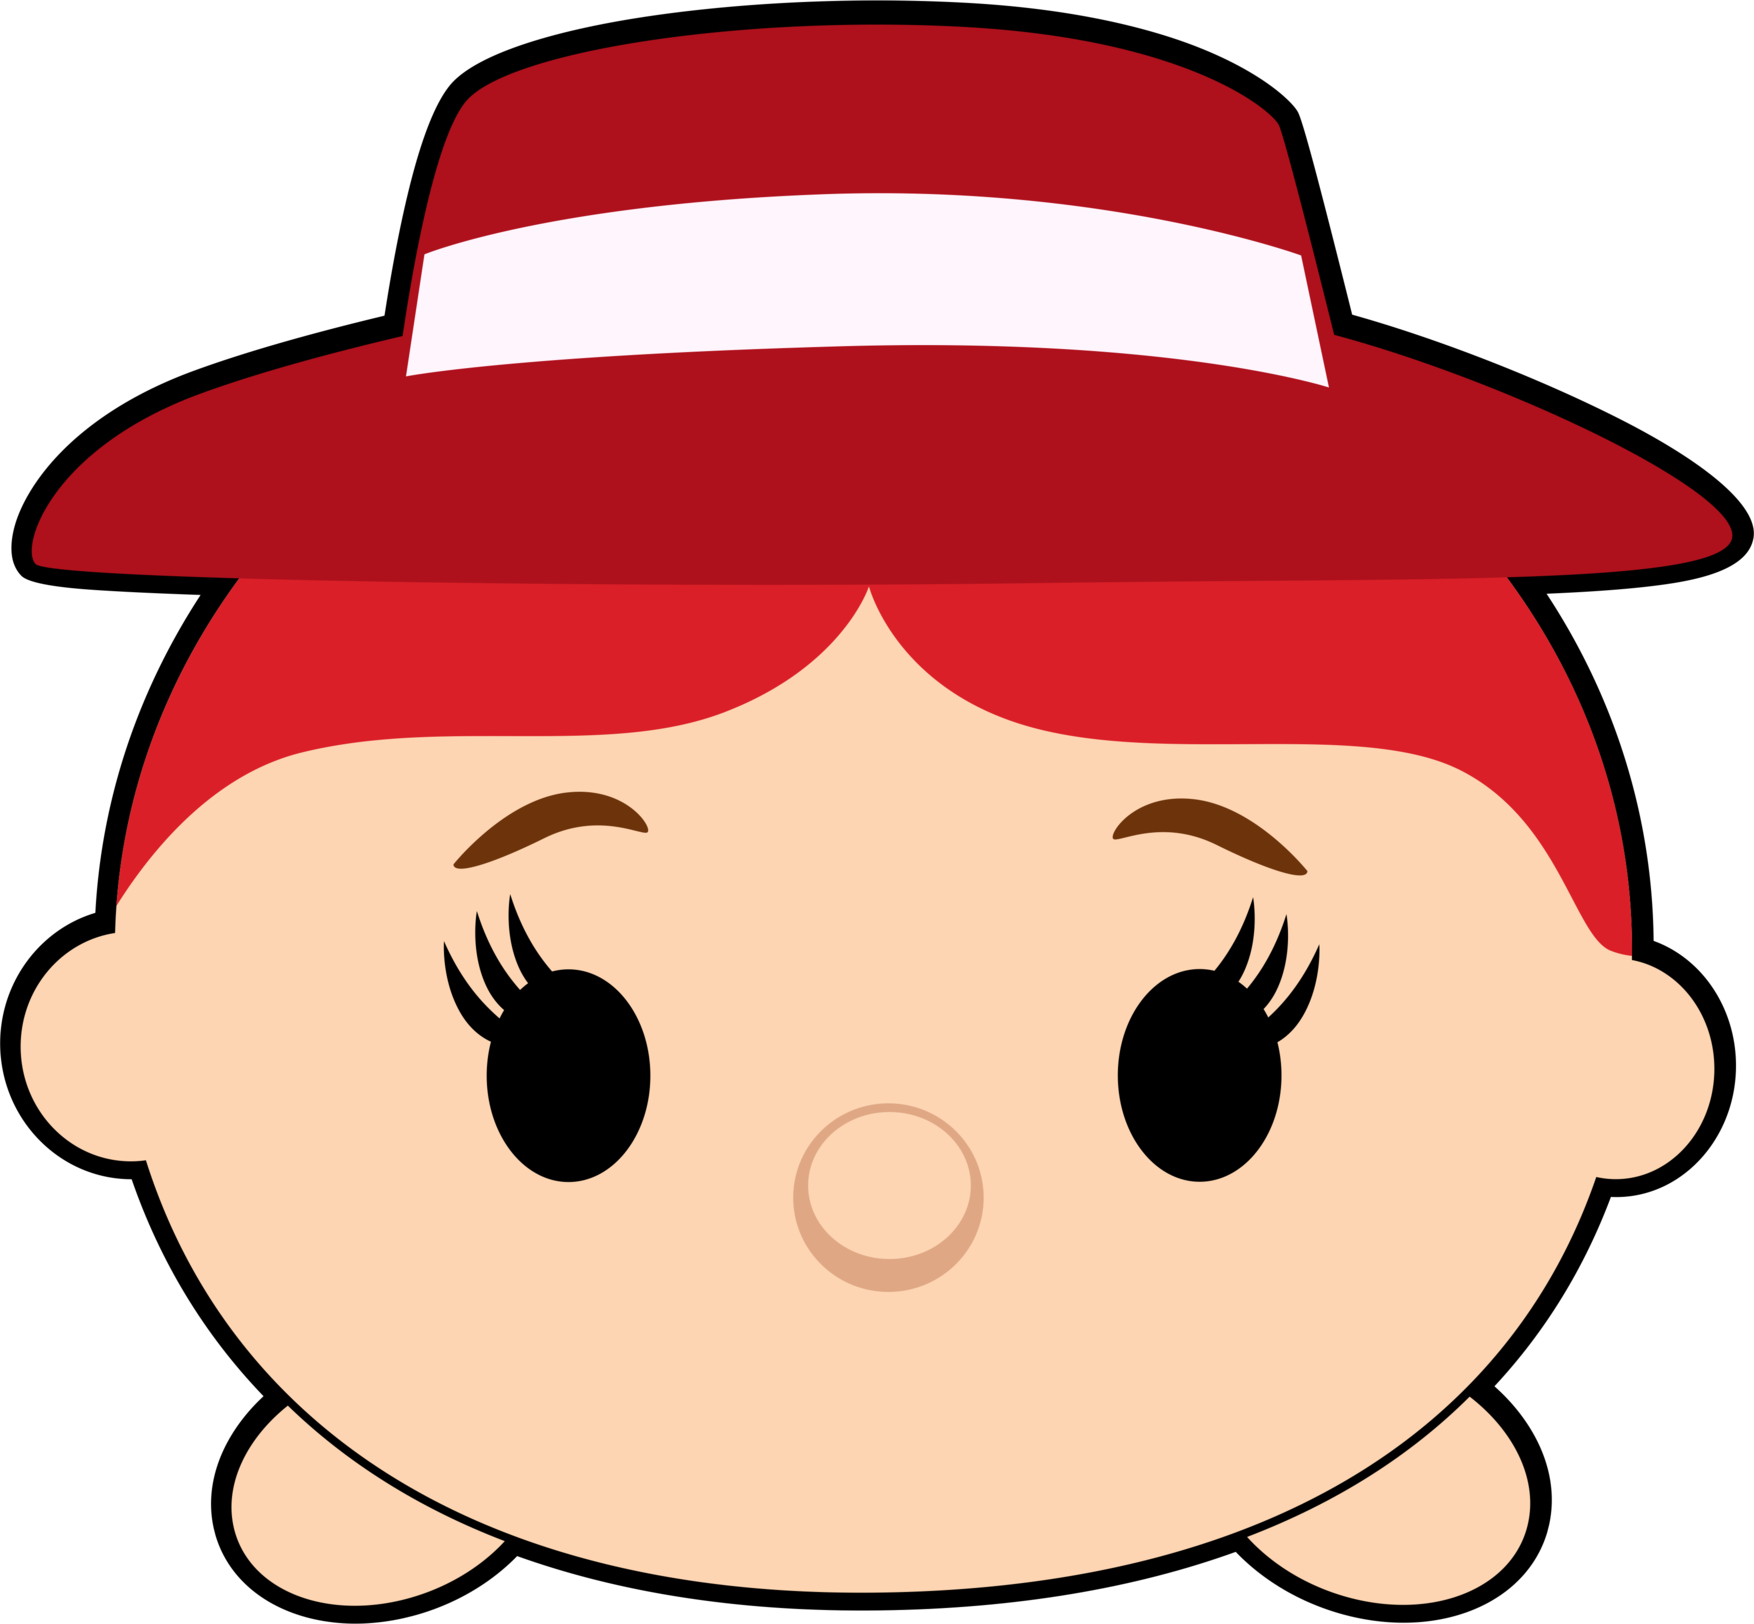 Red Hatted Tsum Tsum Character PNG image